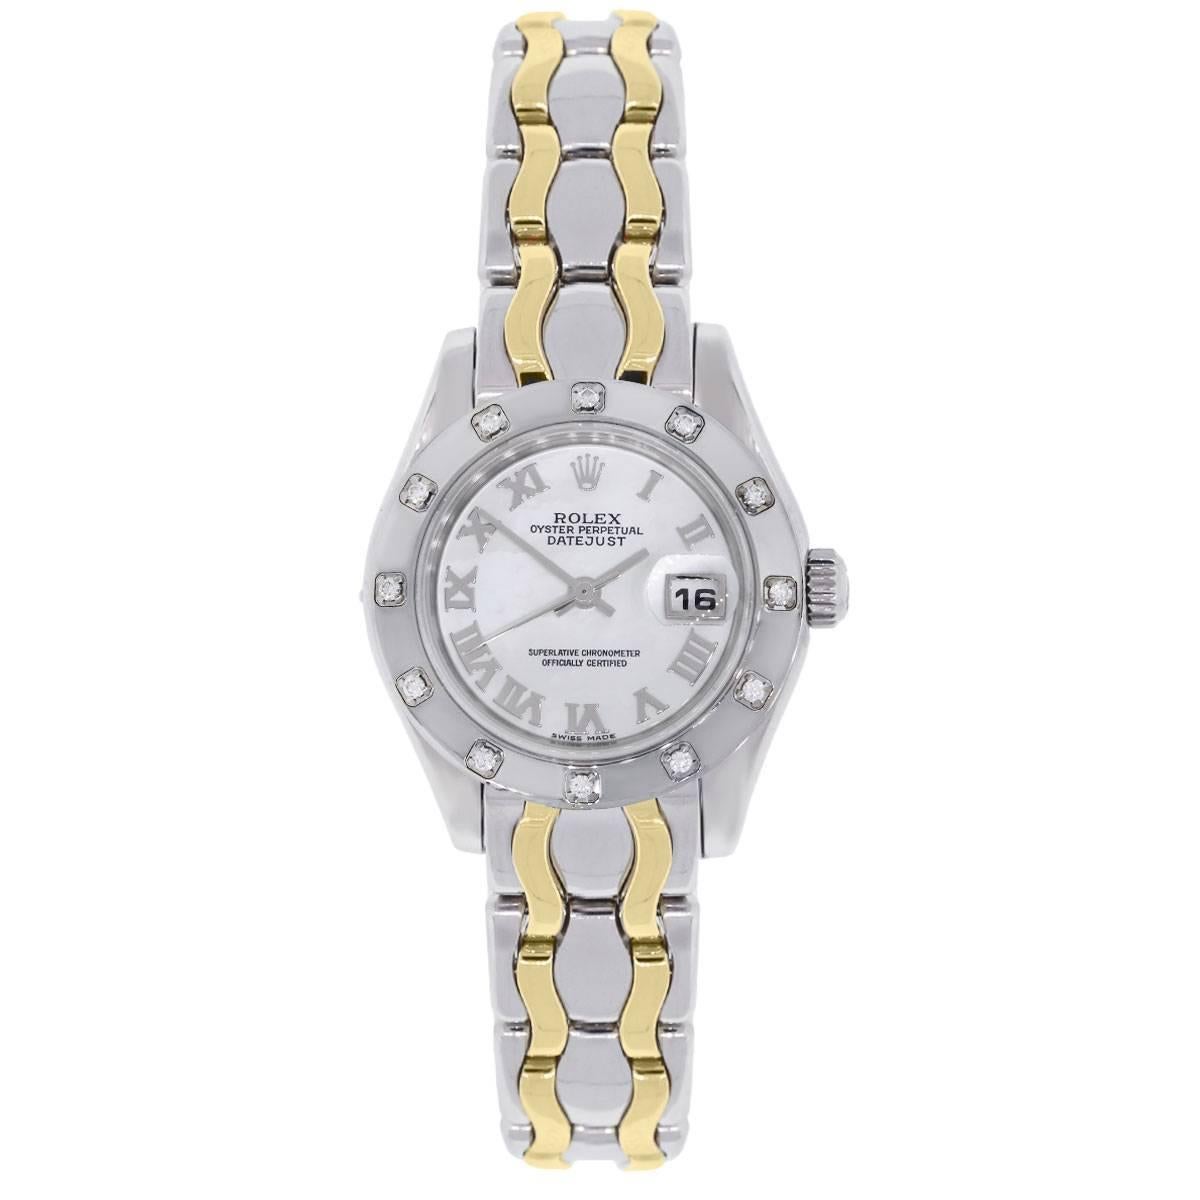 Brand: Rolex
MPN: 80319
Model: Datejust Pearlmaster
Case Material: 18k white gold
Case Diameter: 29mm
Crystal: Scratch resistant sapphire
Bezel: 18k white gold diamond bezel (factory)
Dial: Mother of pearl roman dial with date window at the 3